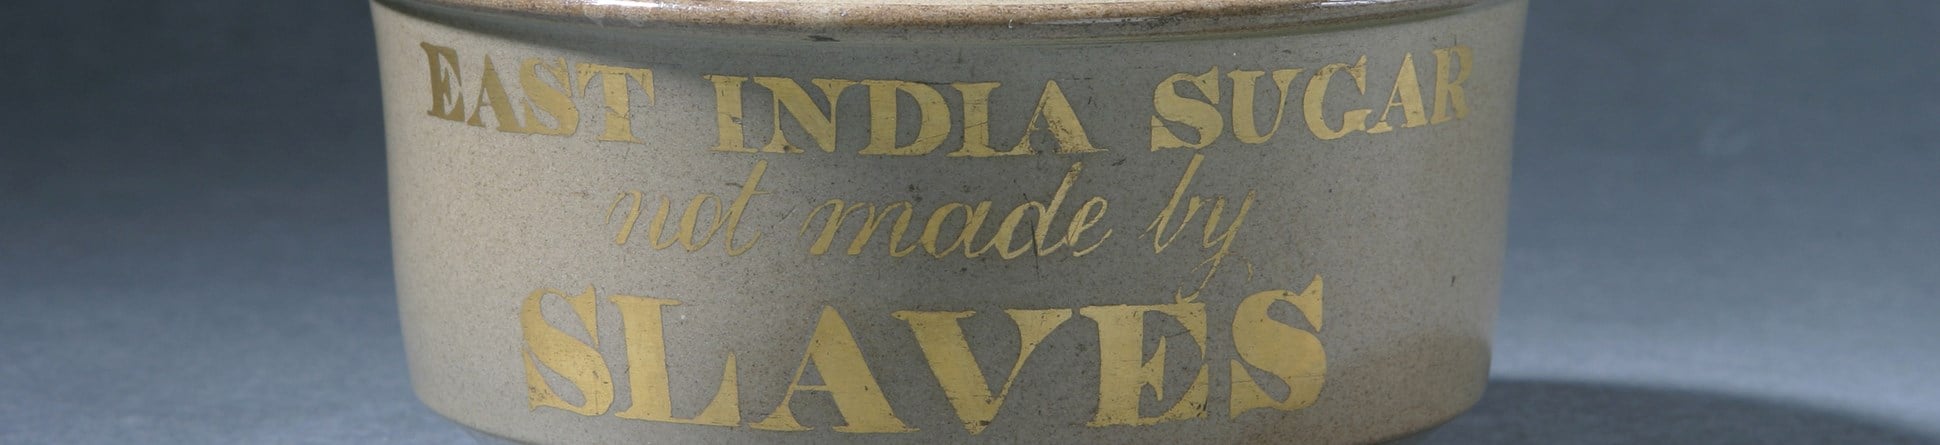 Sugar bowl with gold inscription "East India sugar not made by slaves".